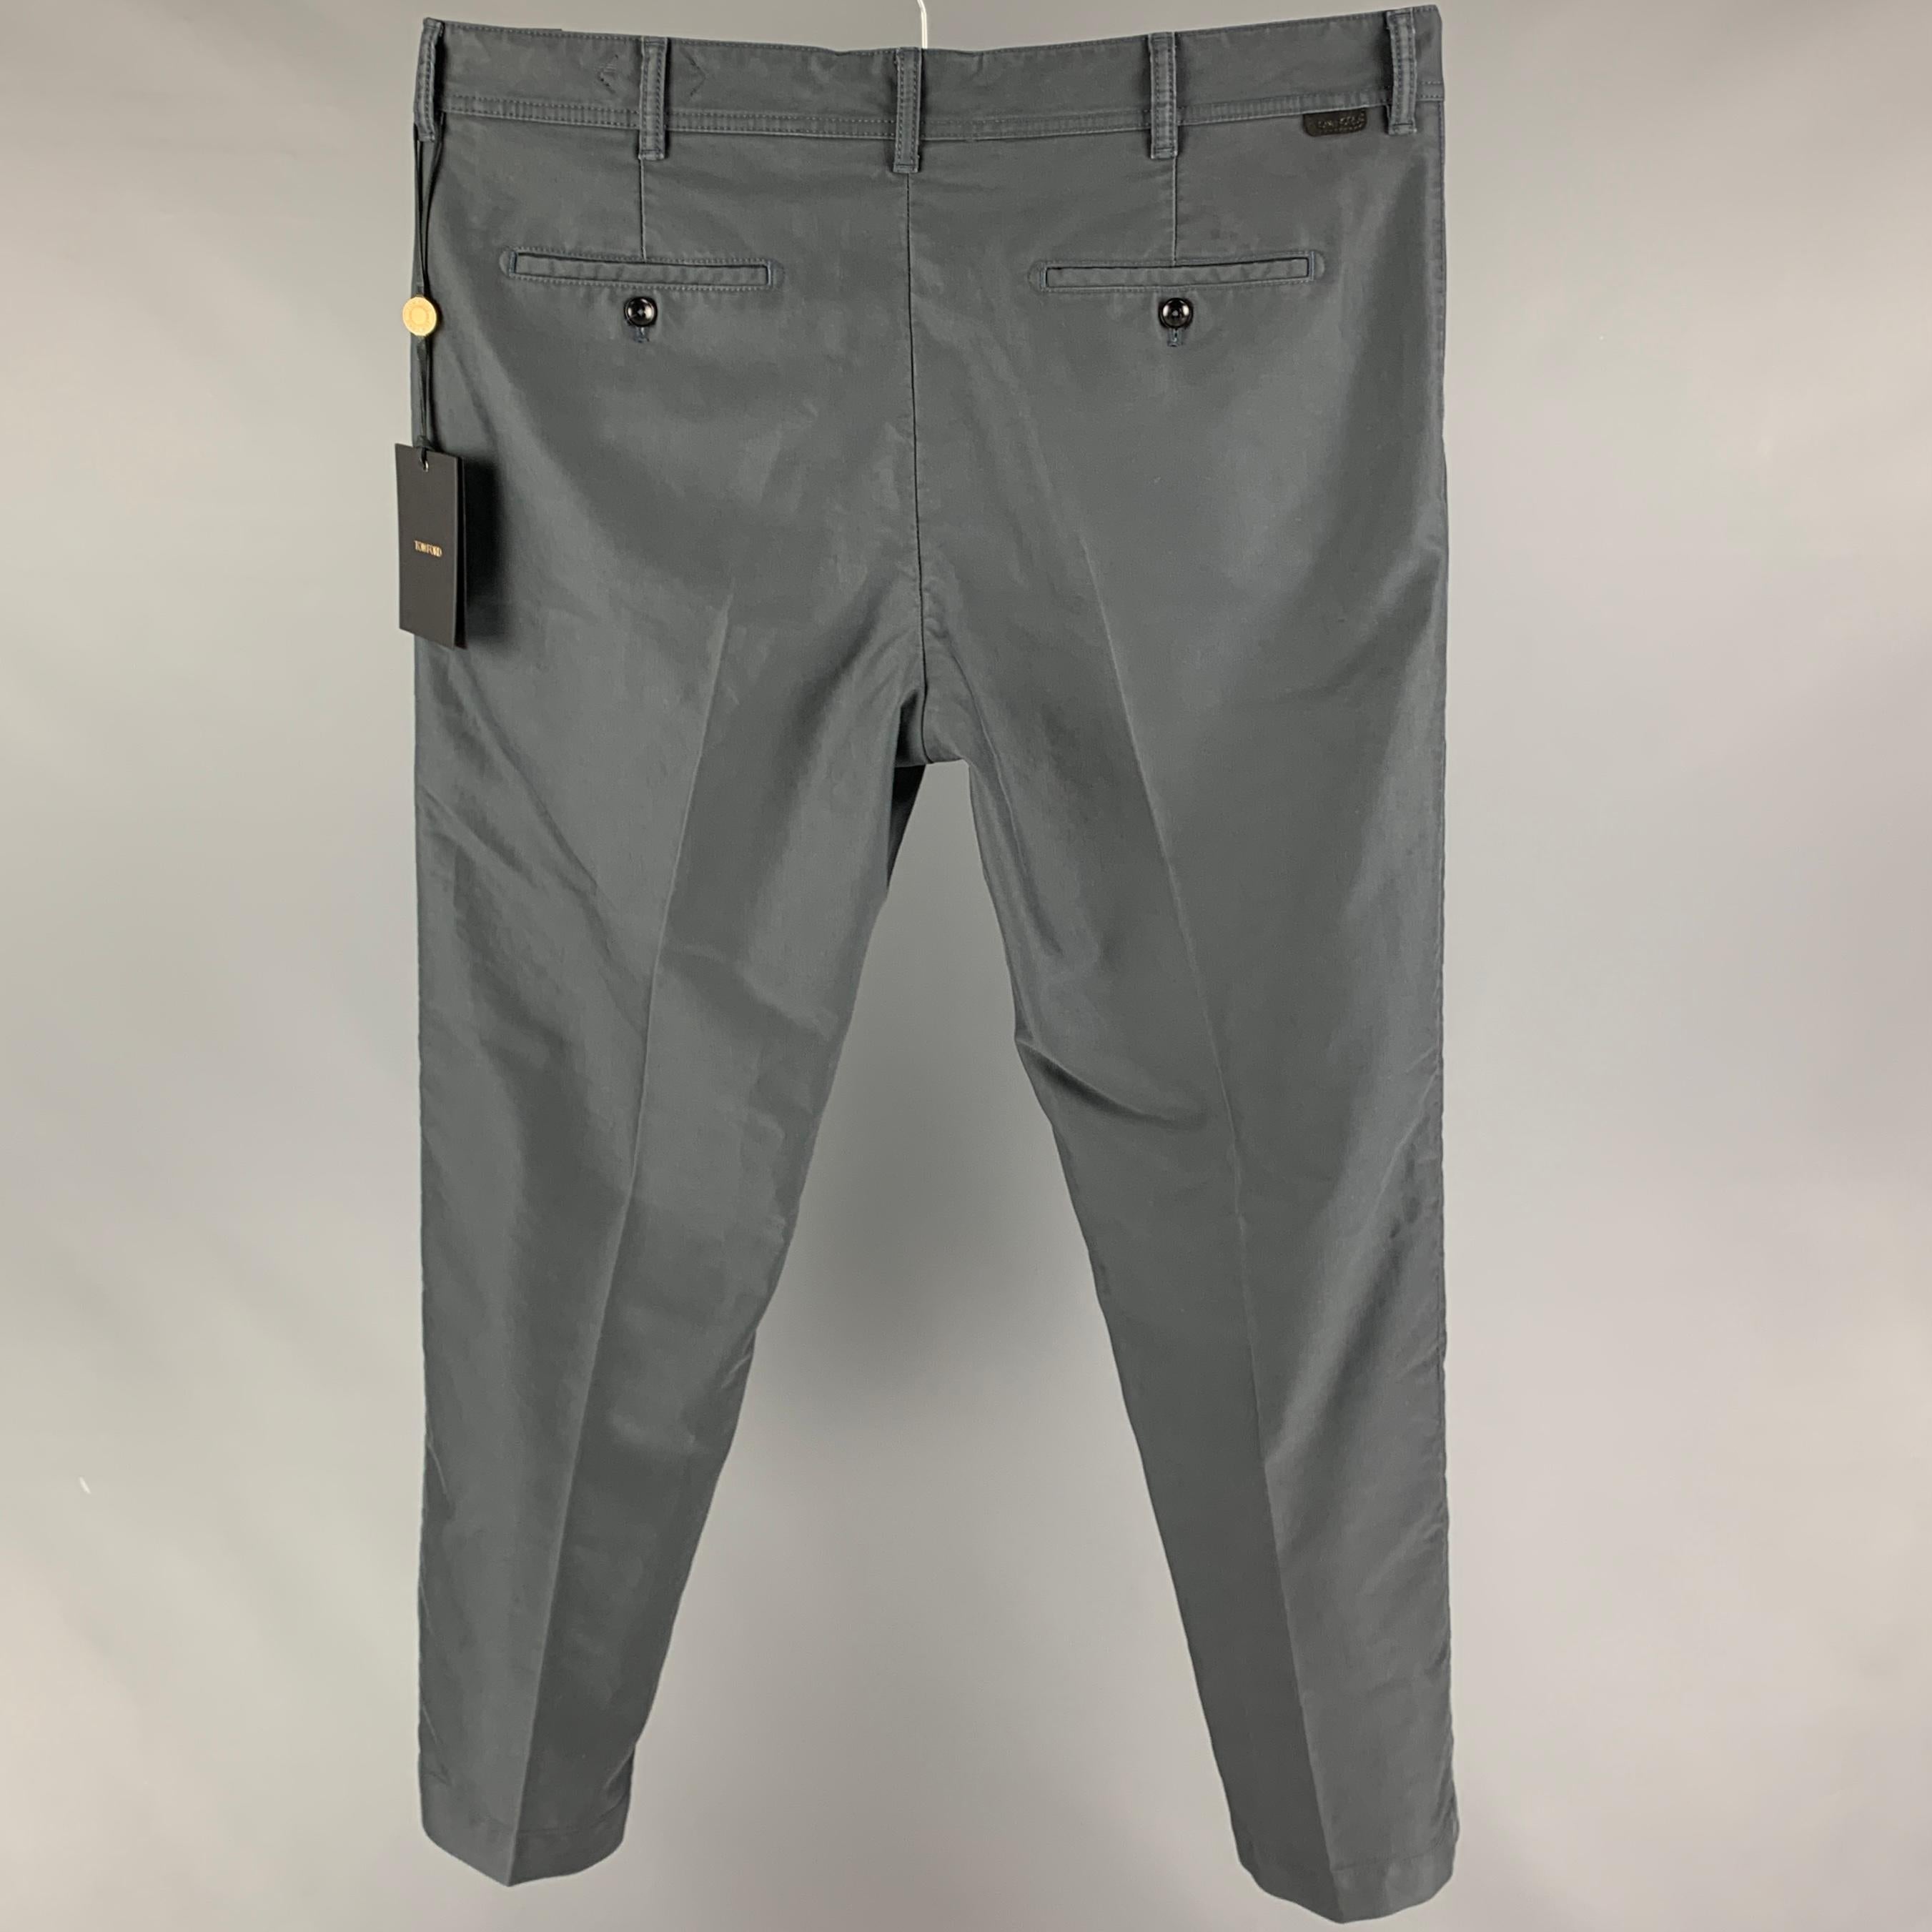 TOM FORD casual pants comes in a slate cotton featuring a flat front, front tab, and a button fly closure. Made in Italy. 

New With Tags. 
Marked: 38
Original Retail Price: $790.00

Measurements:

Waist: 40 in.
Rise: 11.5 in.
Inseam: 31 in. 